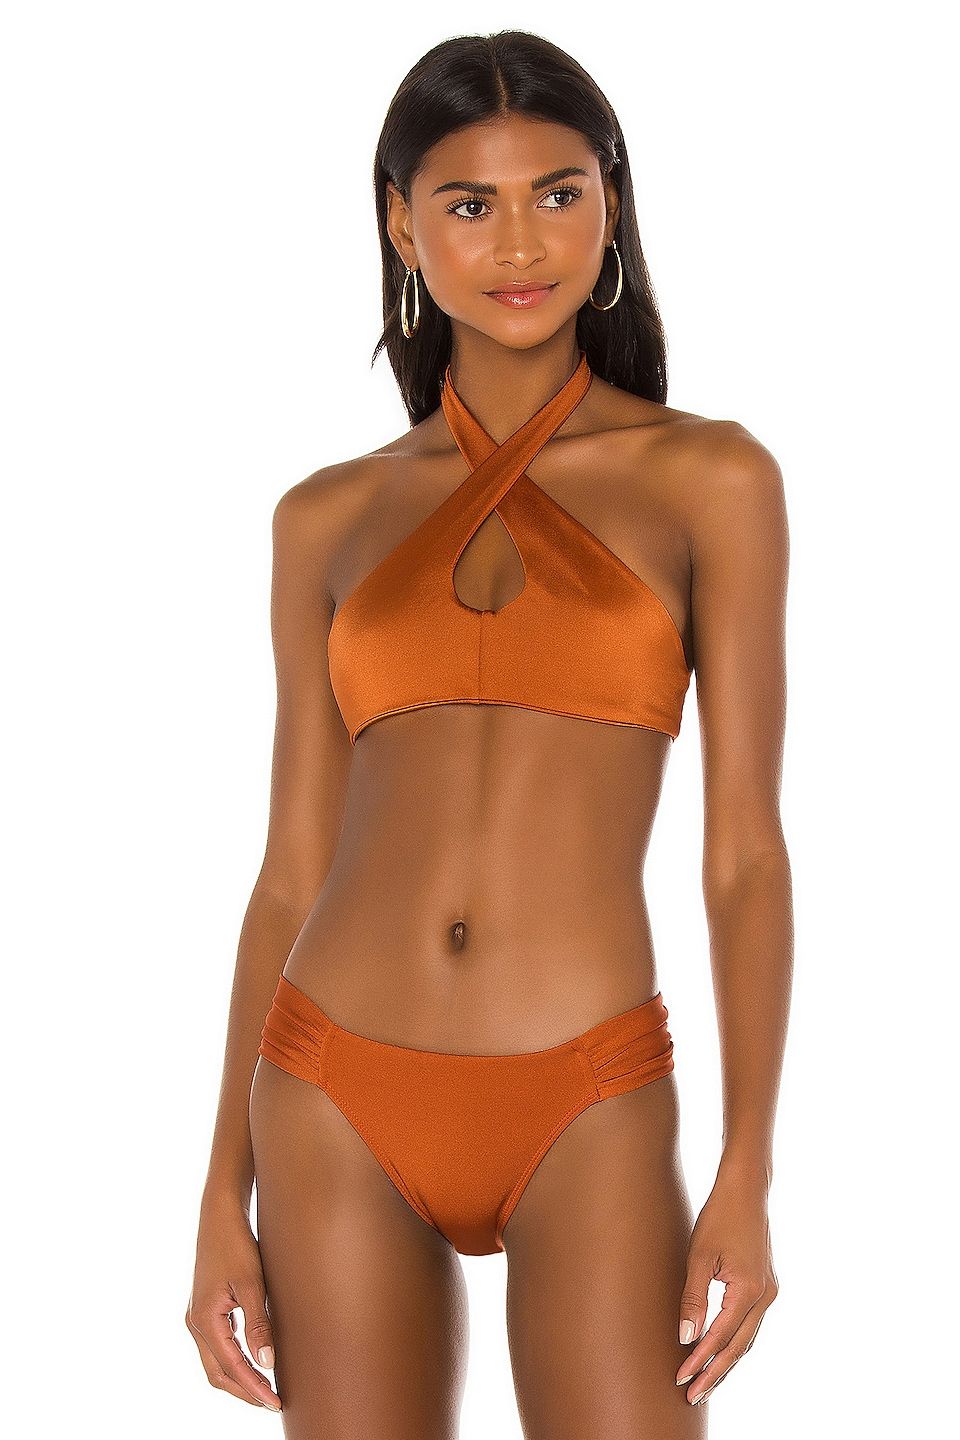 18 Best Swimsuits for a Smaller Bust